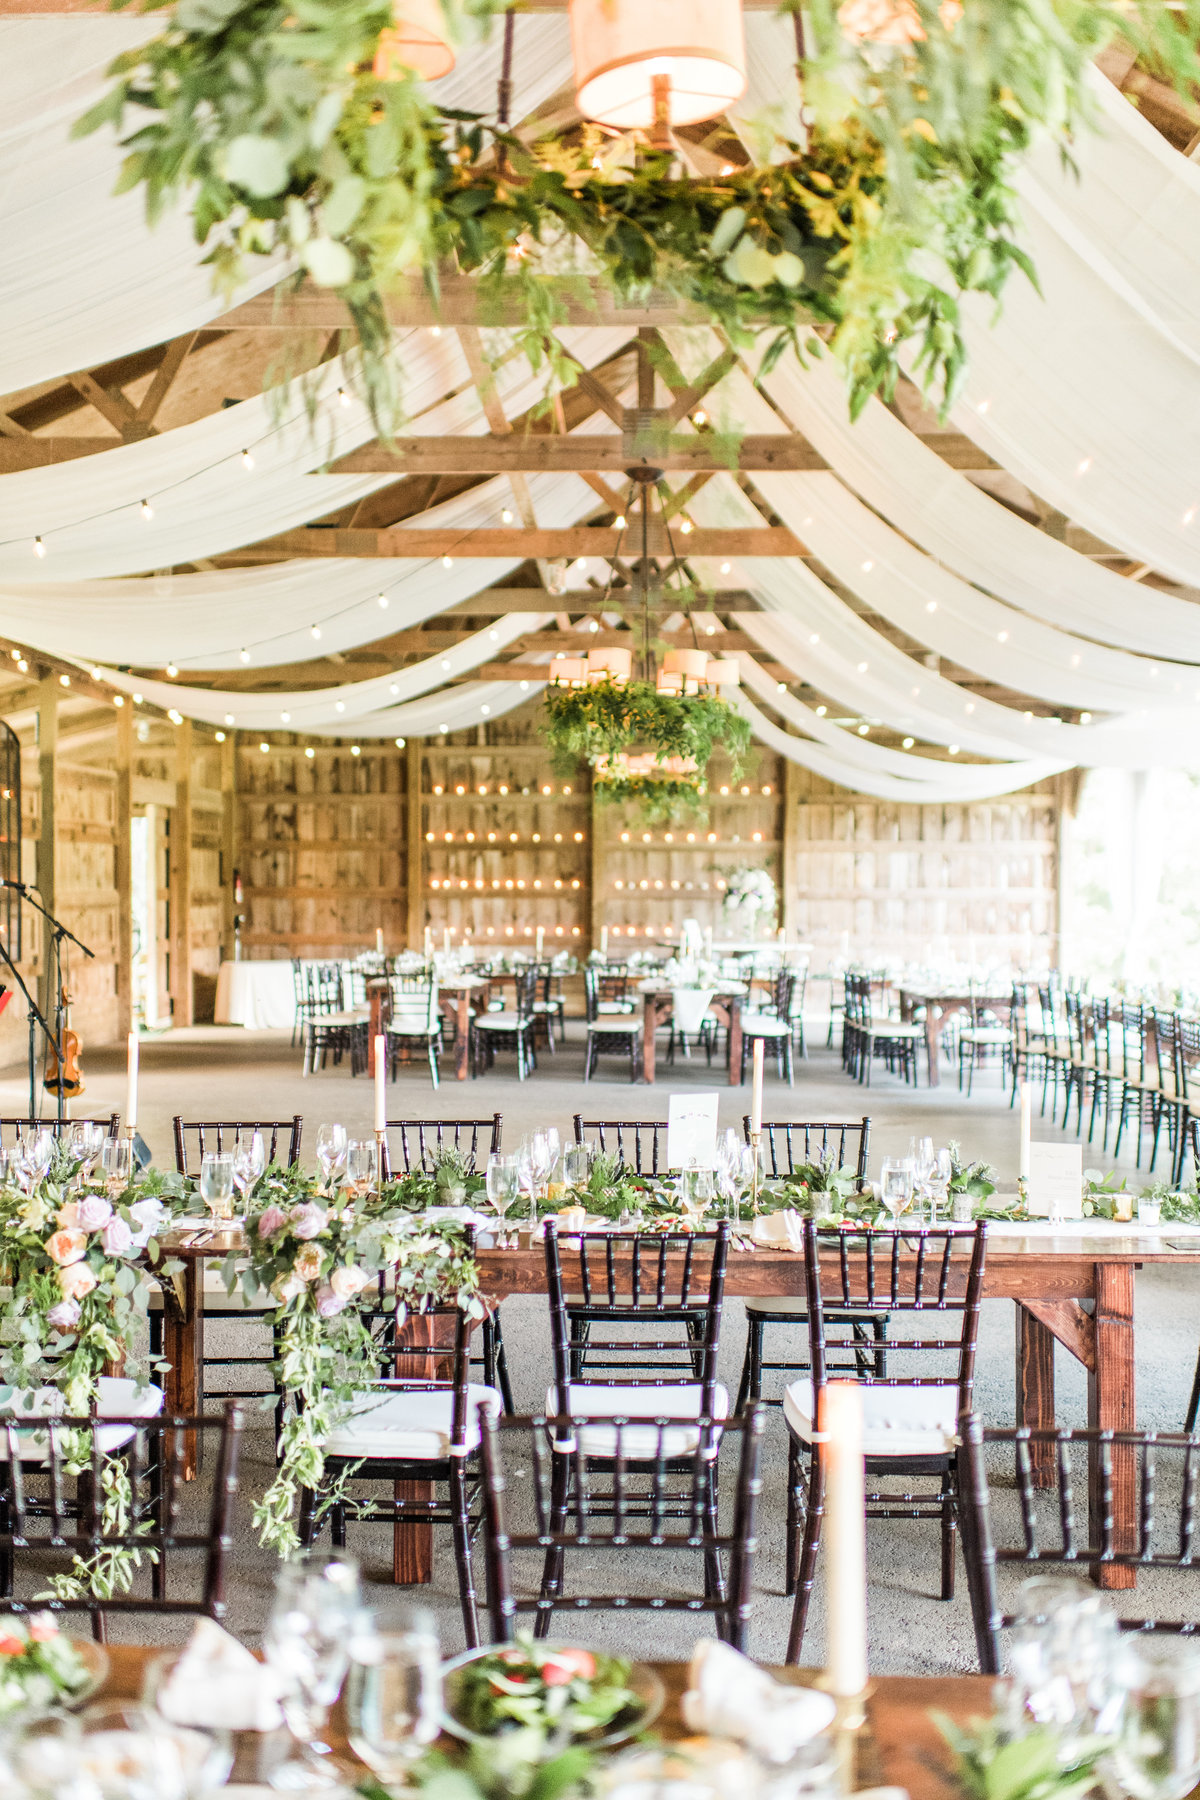 Elegant reception space decorated with hanging cloth, greenery and florals lining the tables.